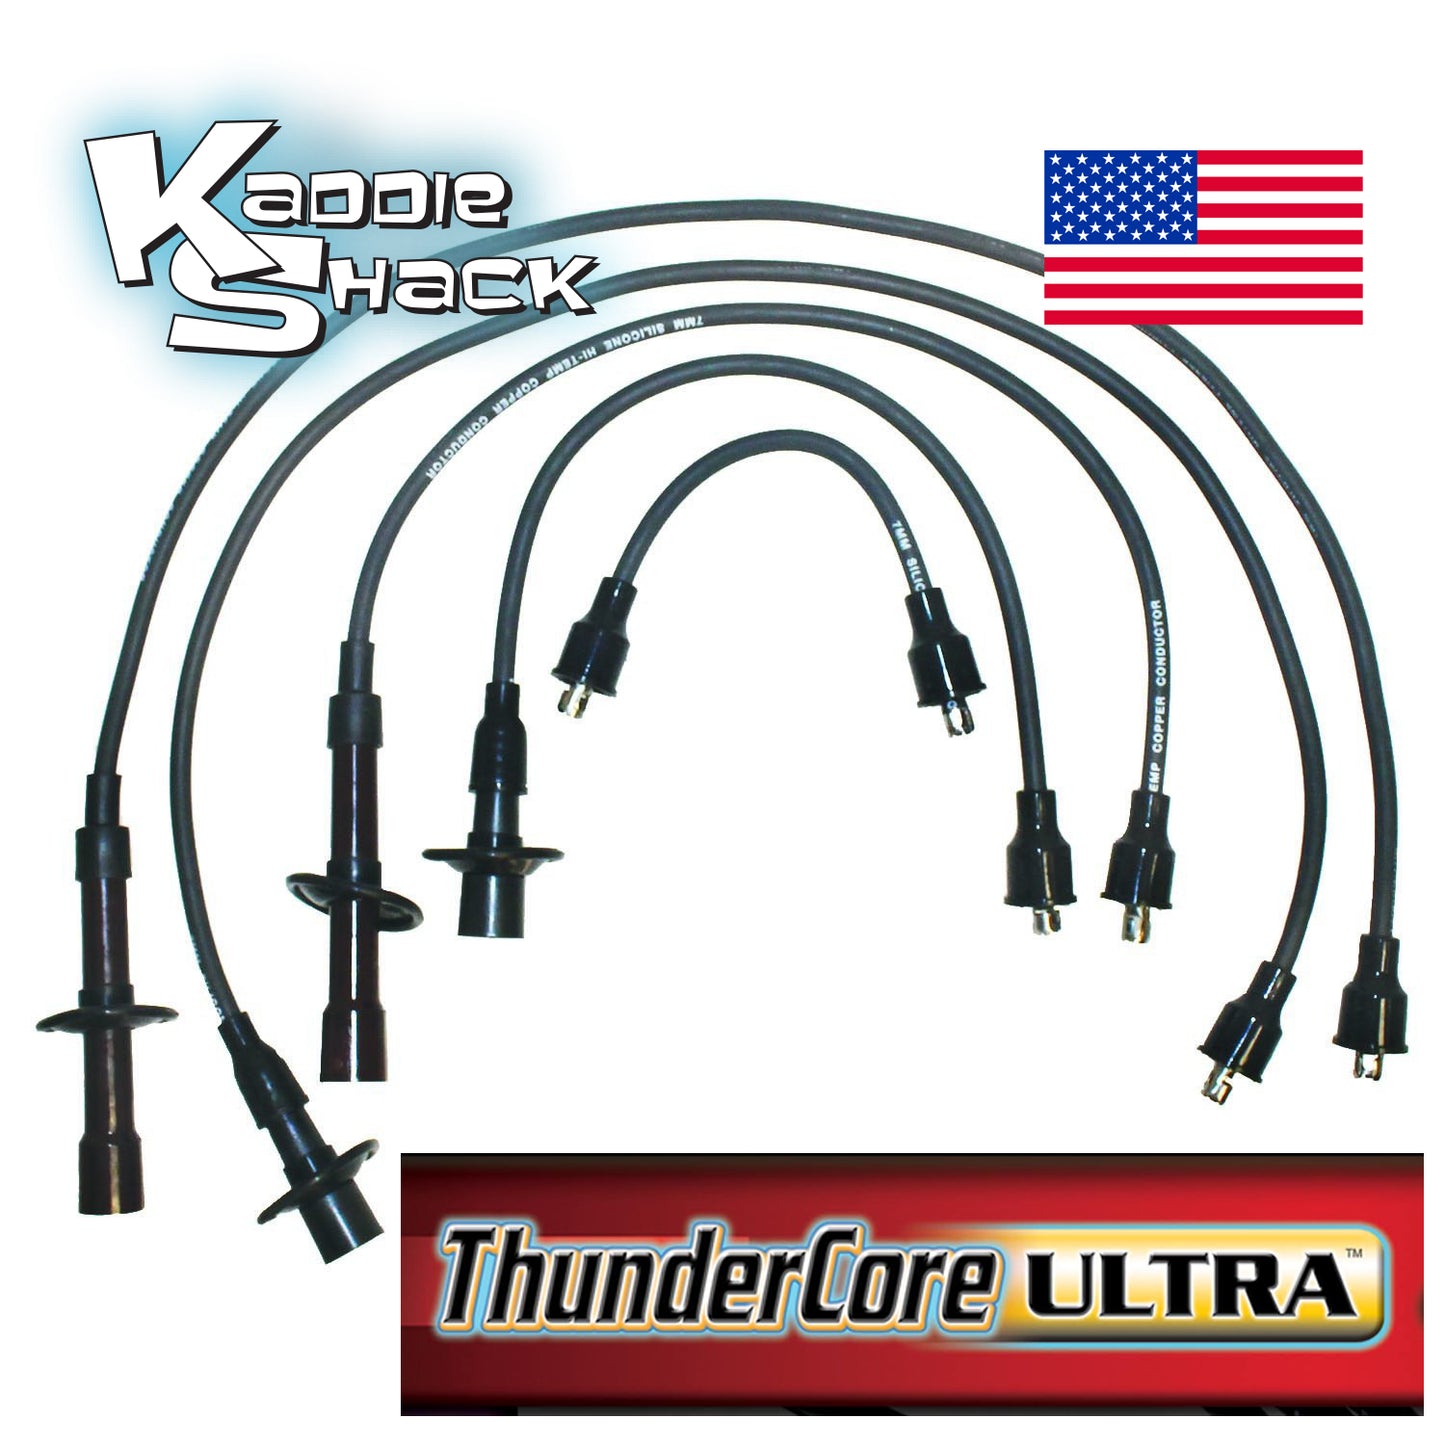 Type 4 Spark Plug Wires, ThunderCore Ultra, Made in USA